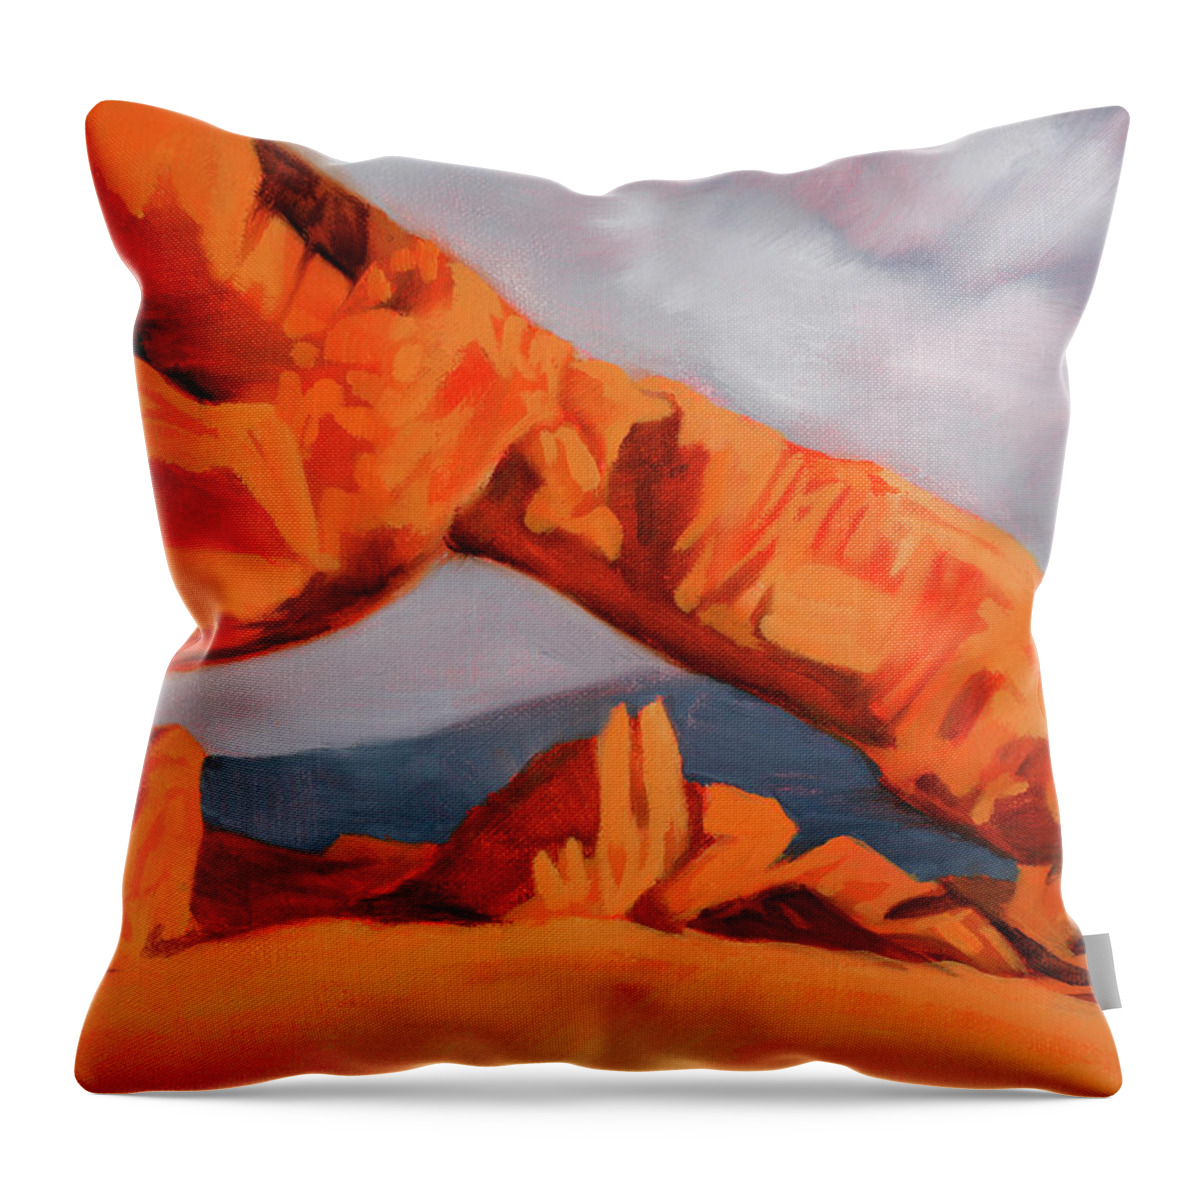 Landscape Throw Pillow featuring the painting Reaching Rock by Sandi Snead